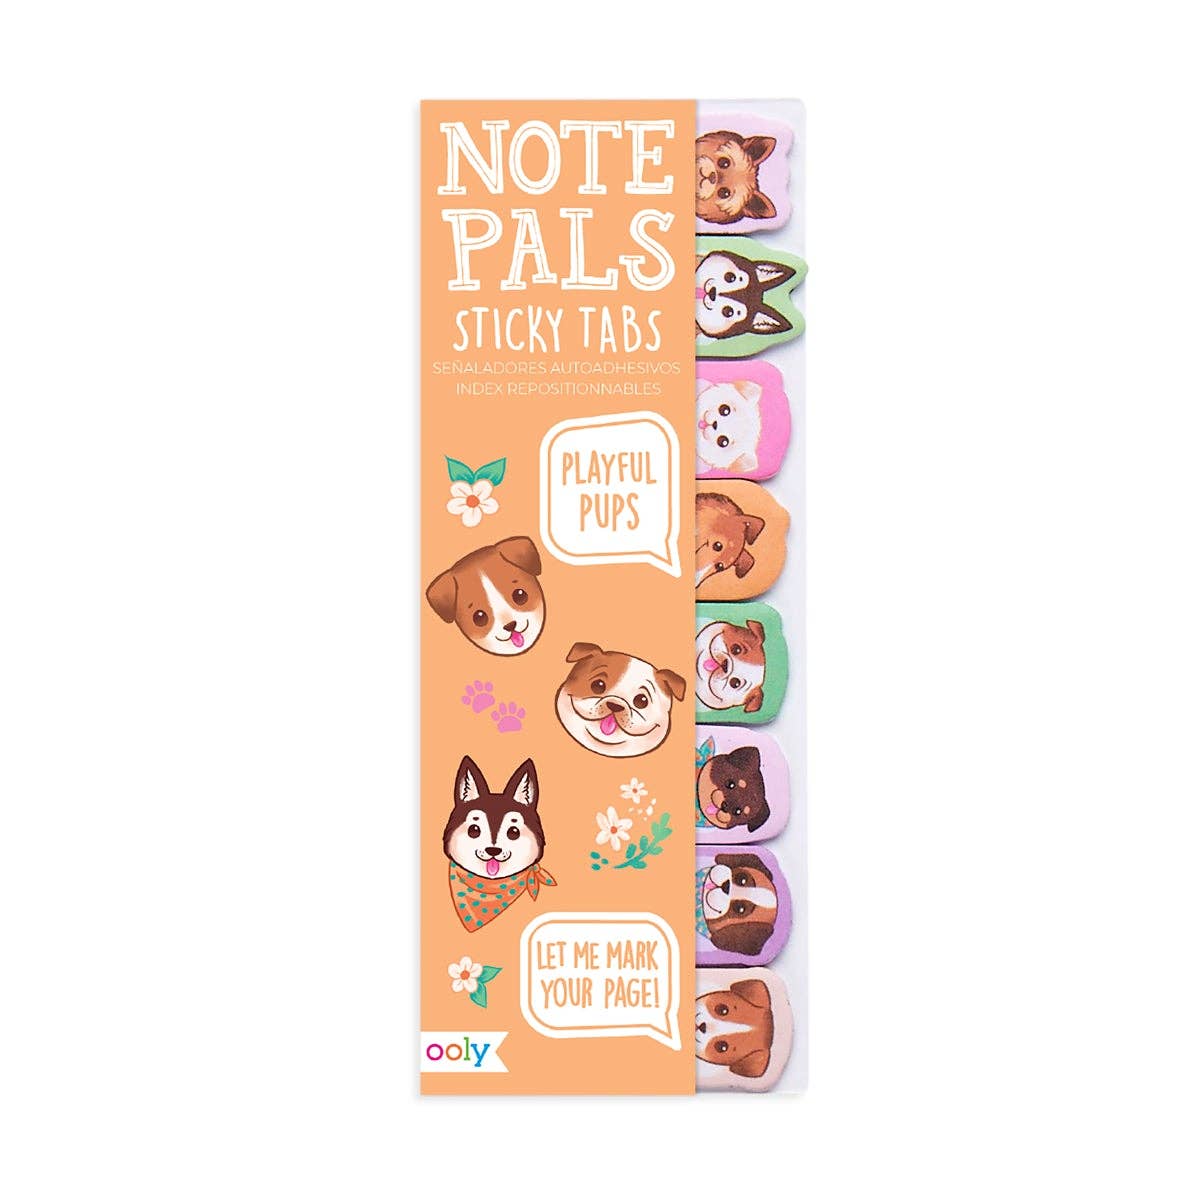 OOLY - Note Pals Sticky Tabs - Playful Pups (1 Pack)